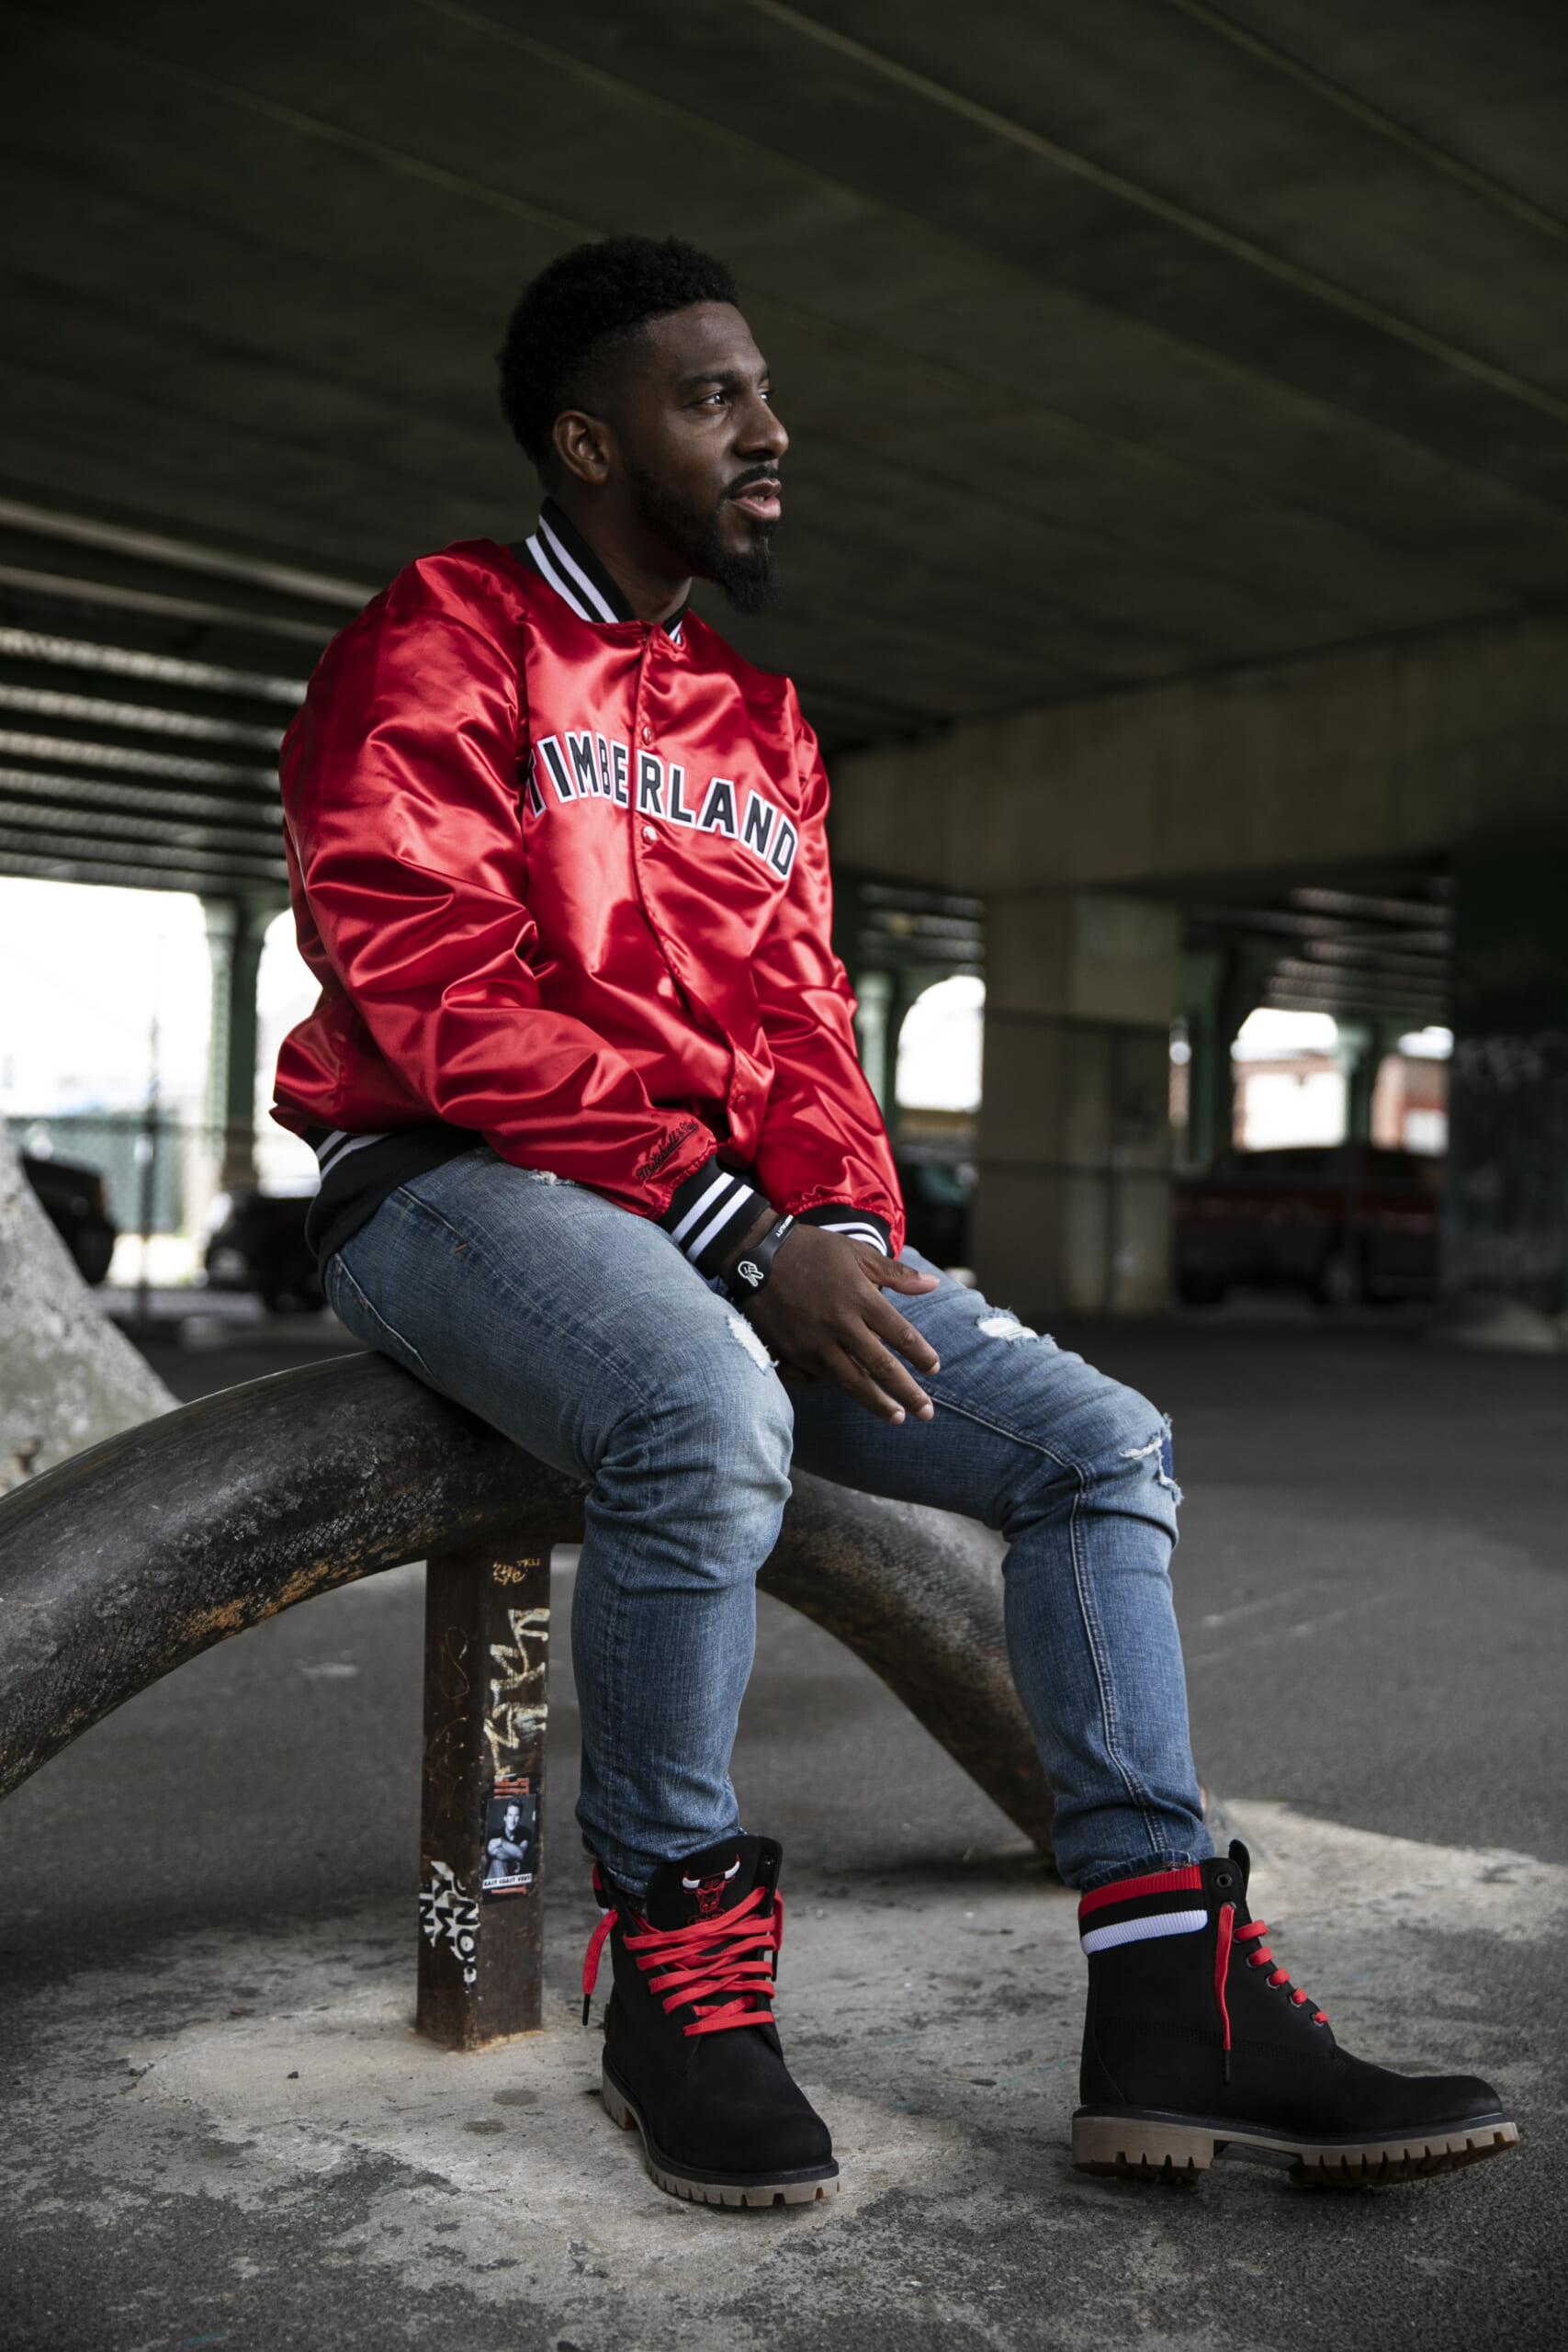 Worlds Collide as Mitchell & Ness, Timberland & the NBA Team Up